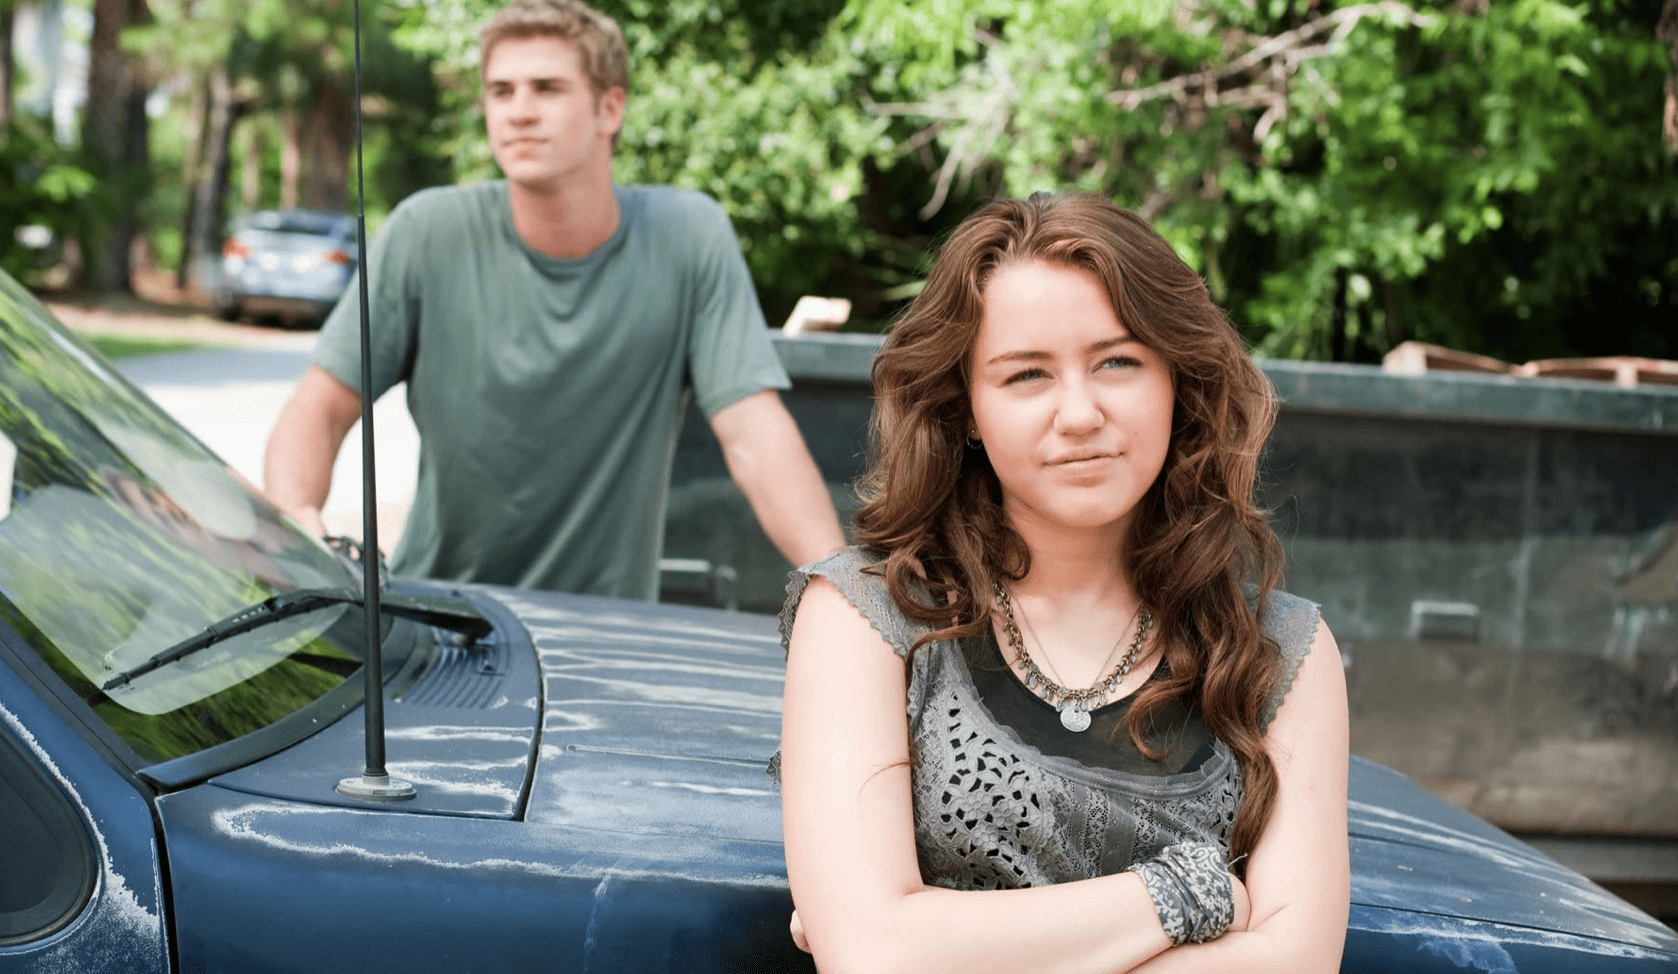 A young Miley Cyrus poses in front of a car while Liam Hemsworth hangs out in the background in this image from Walt Disney Studios.